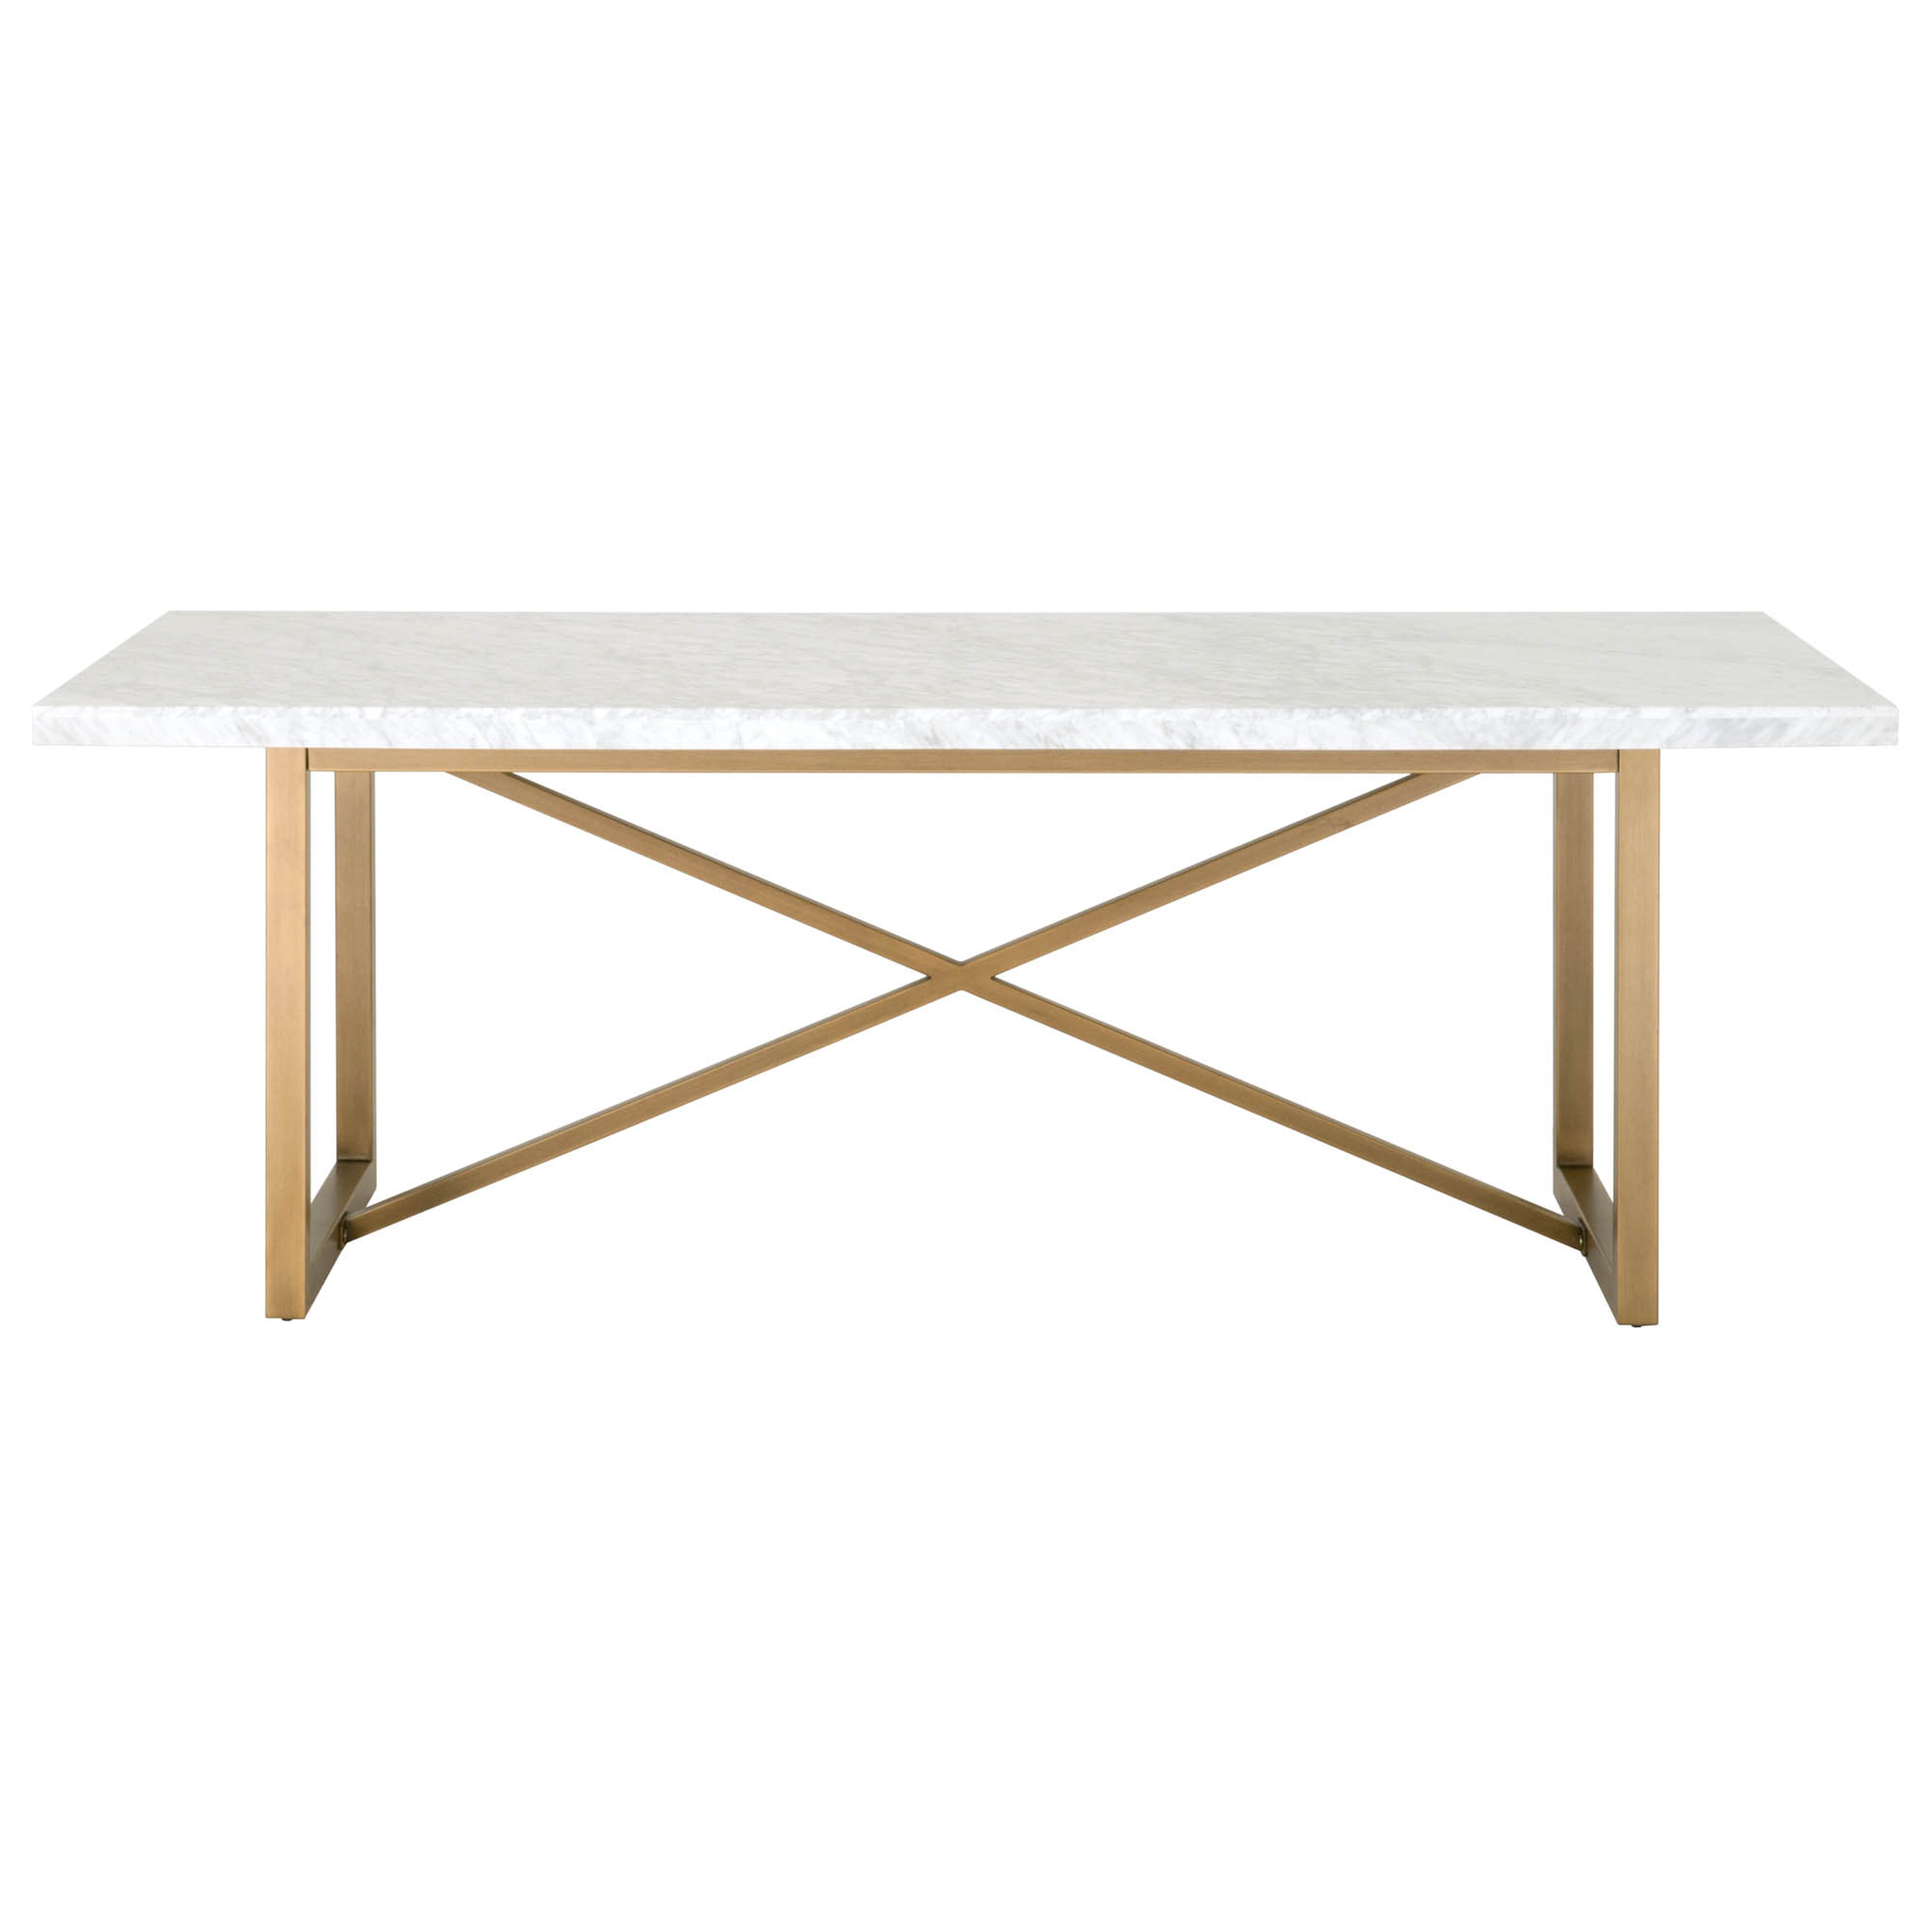 Carrera Dining Table, White & Gold - Alder House